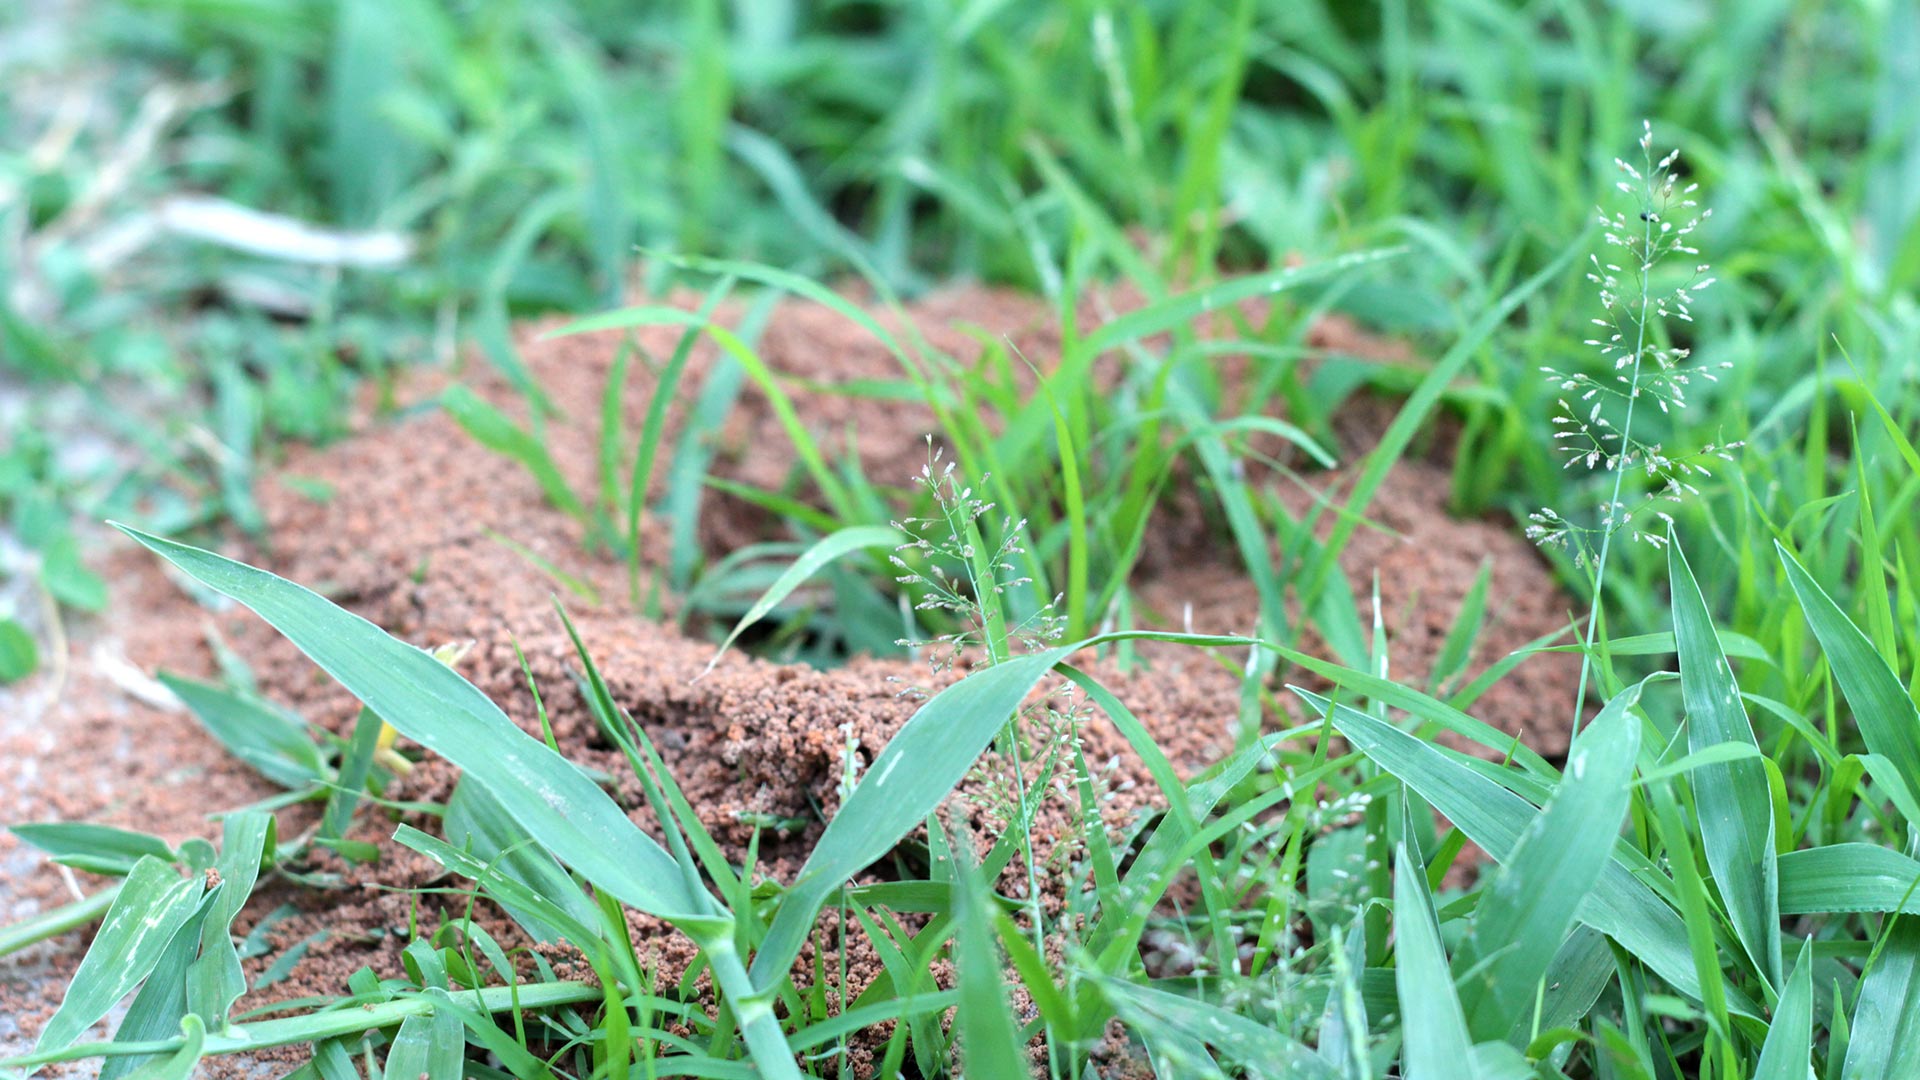 Fire ant hill found in a lawn in Arlington, TX.